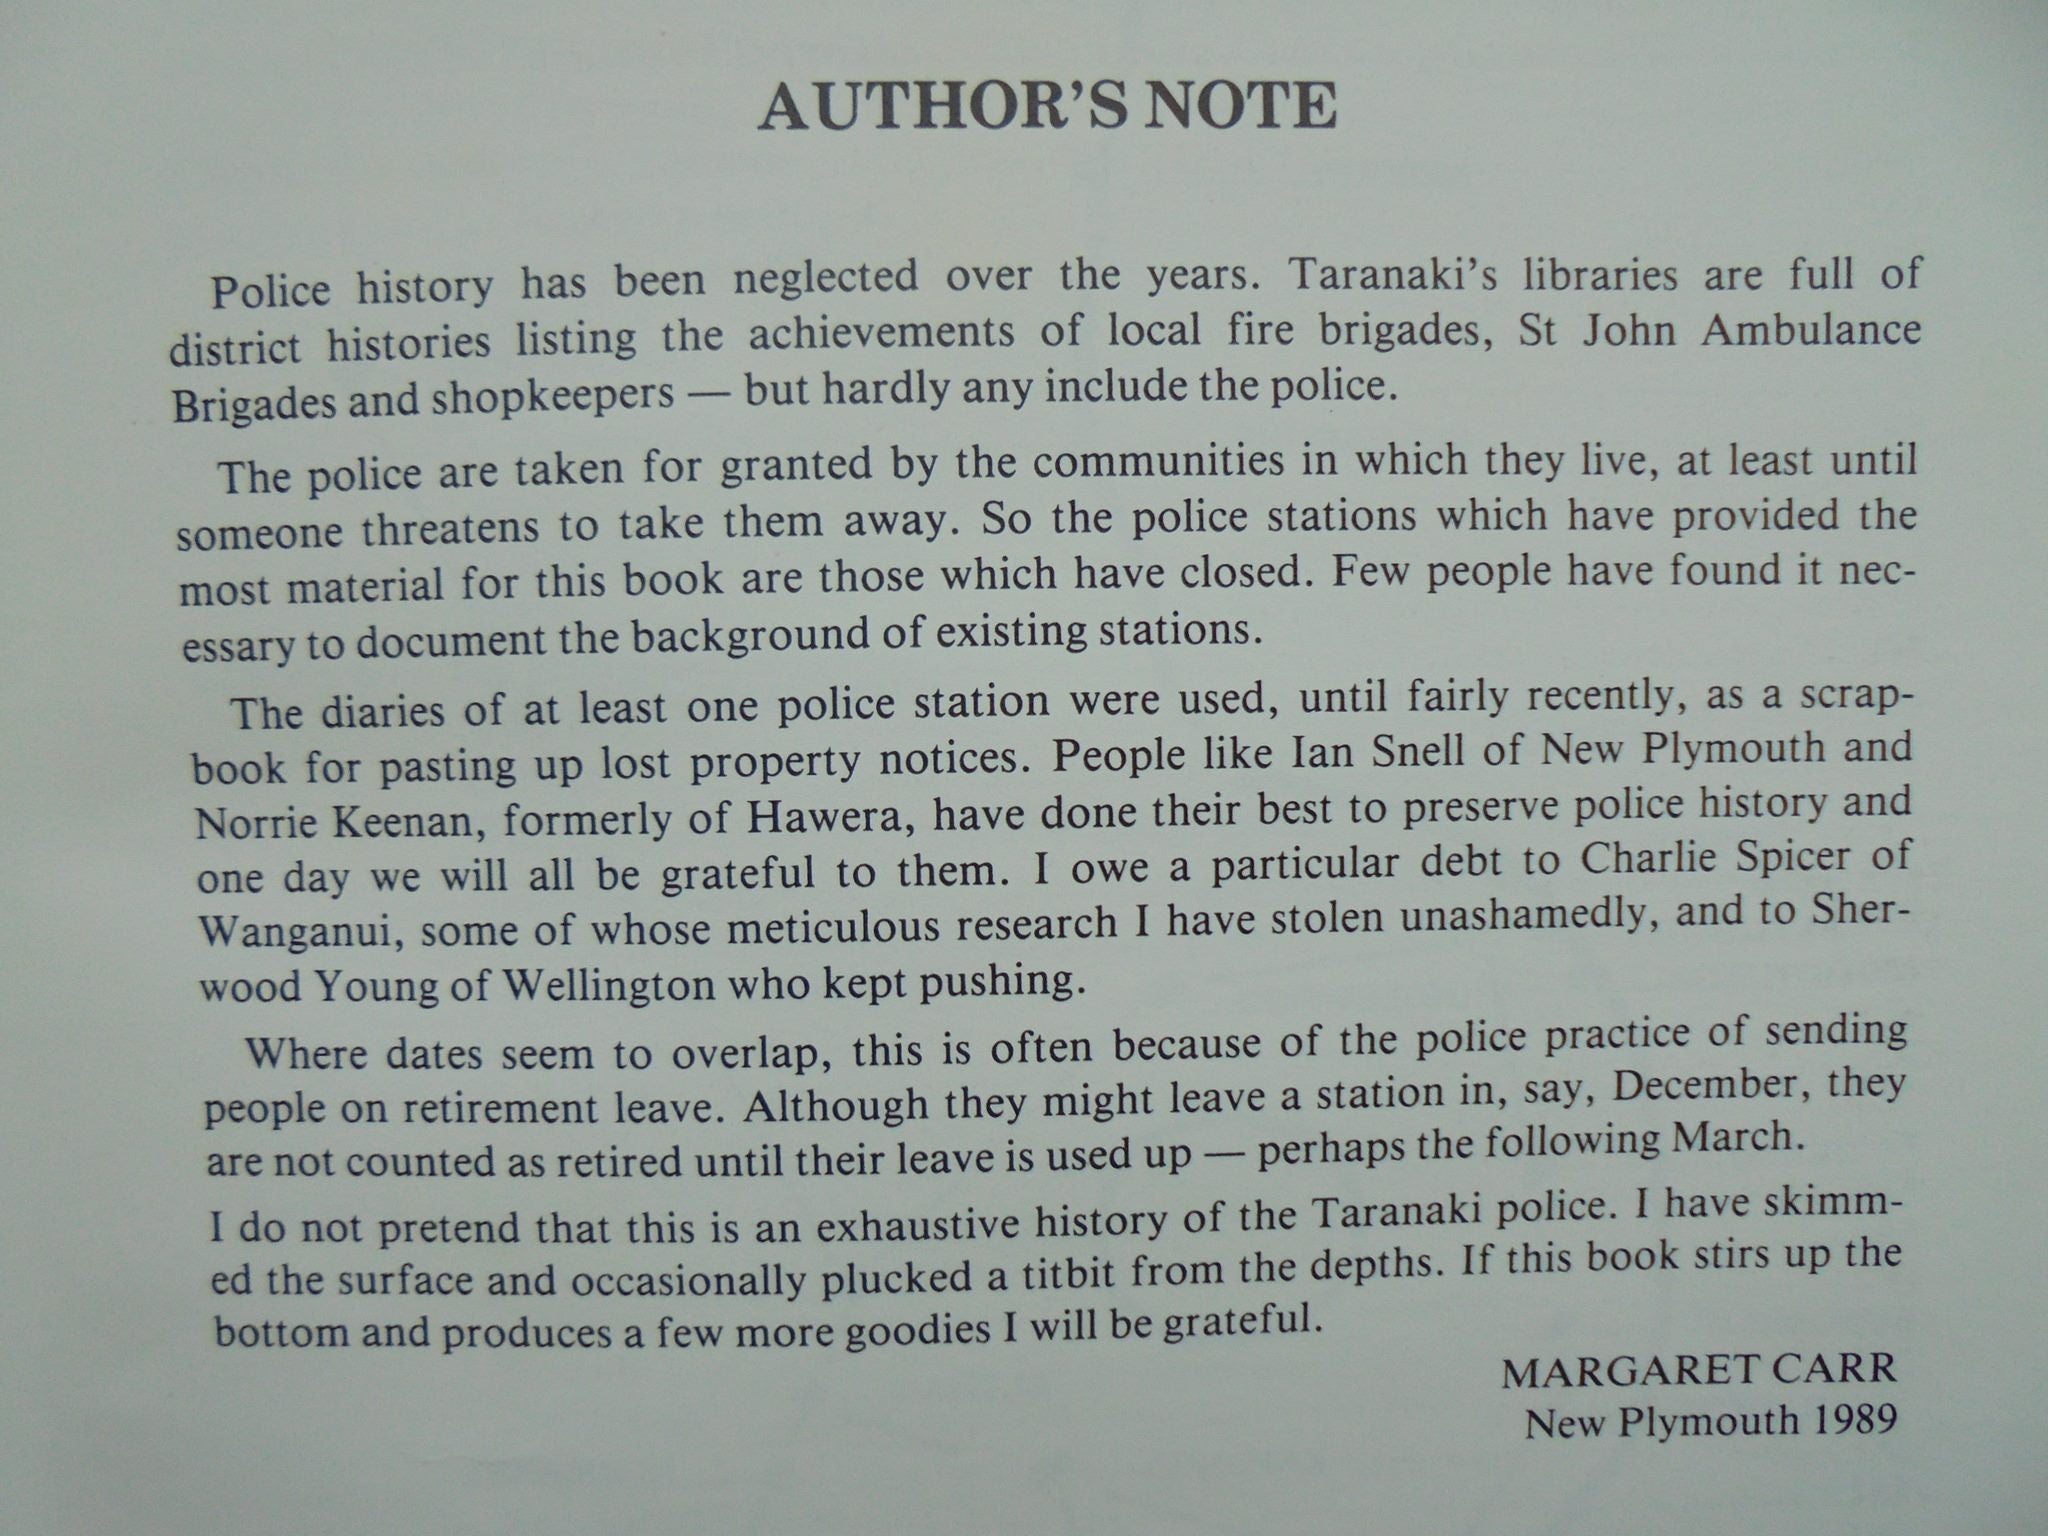 Policing in the Mountain Shadow: A History of the Taranaki Police. By Margaret Carr. SIGNED BY AUTHOR.